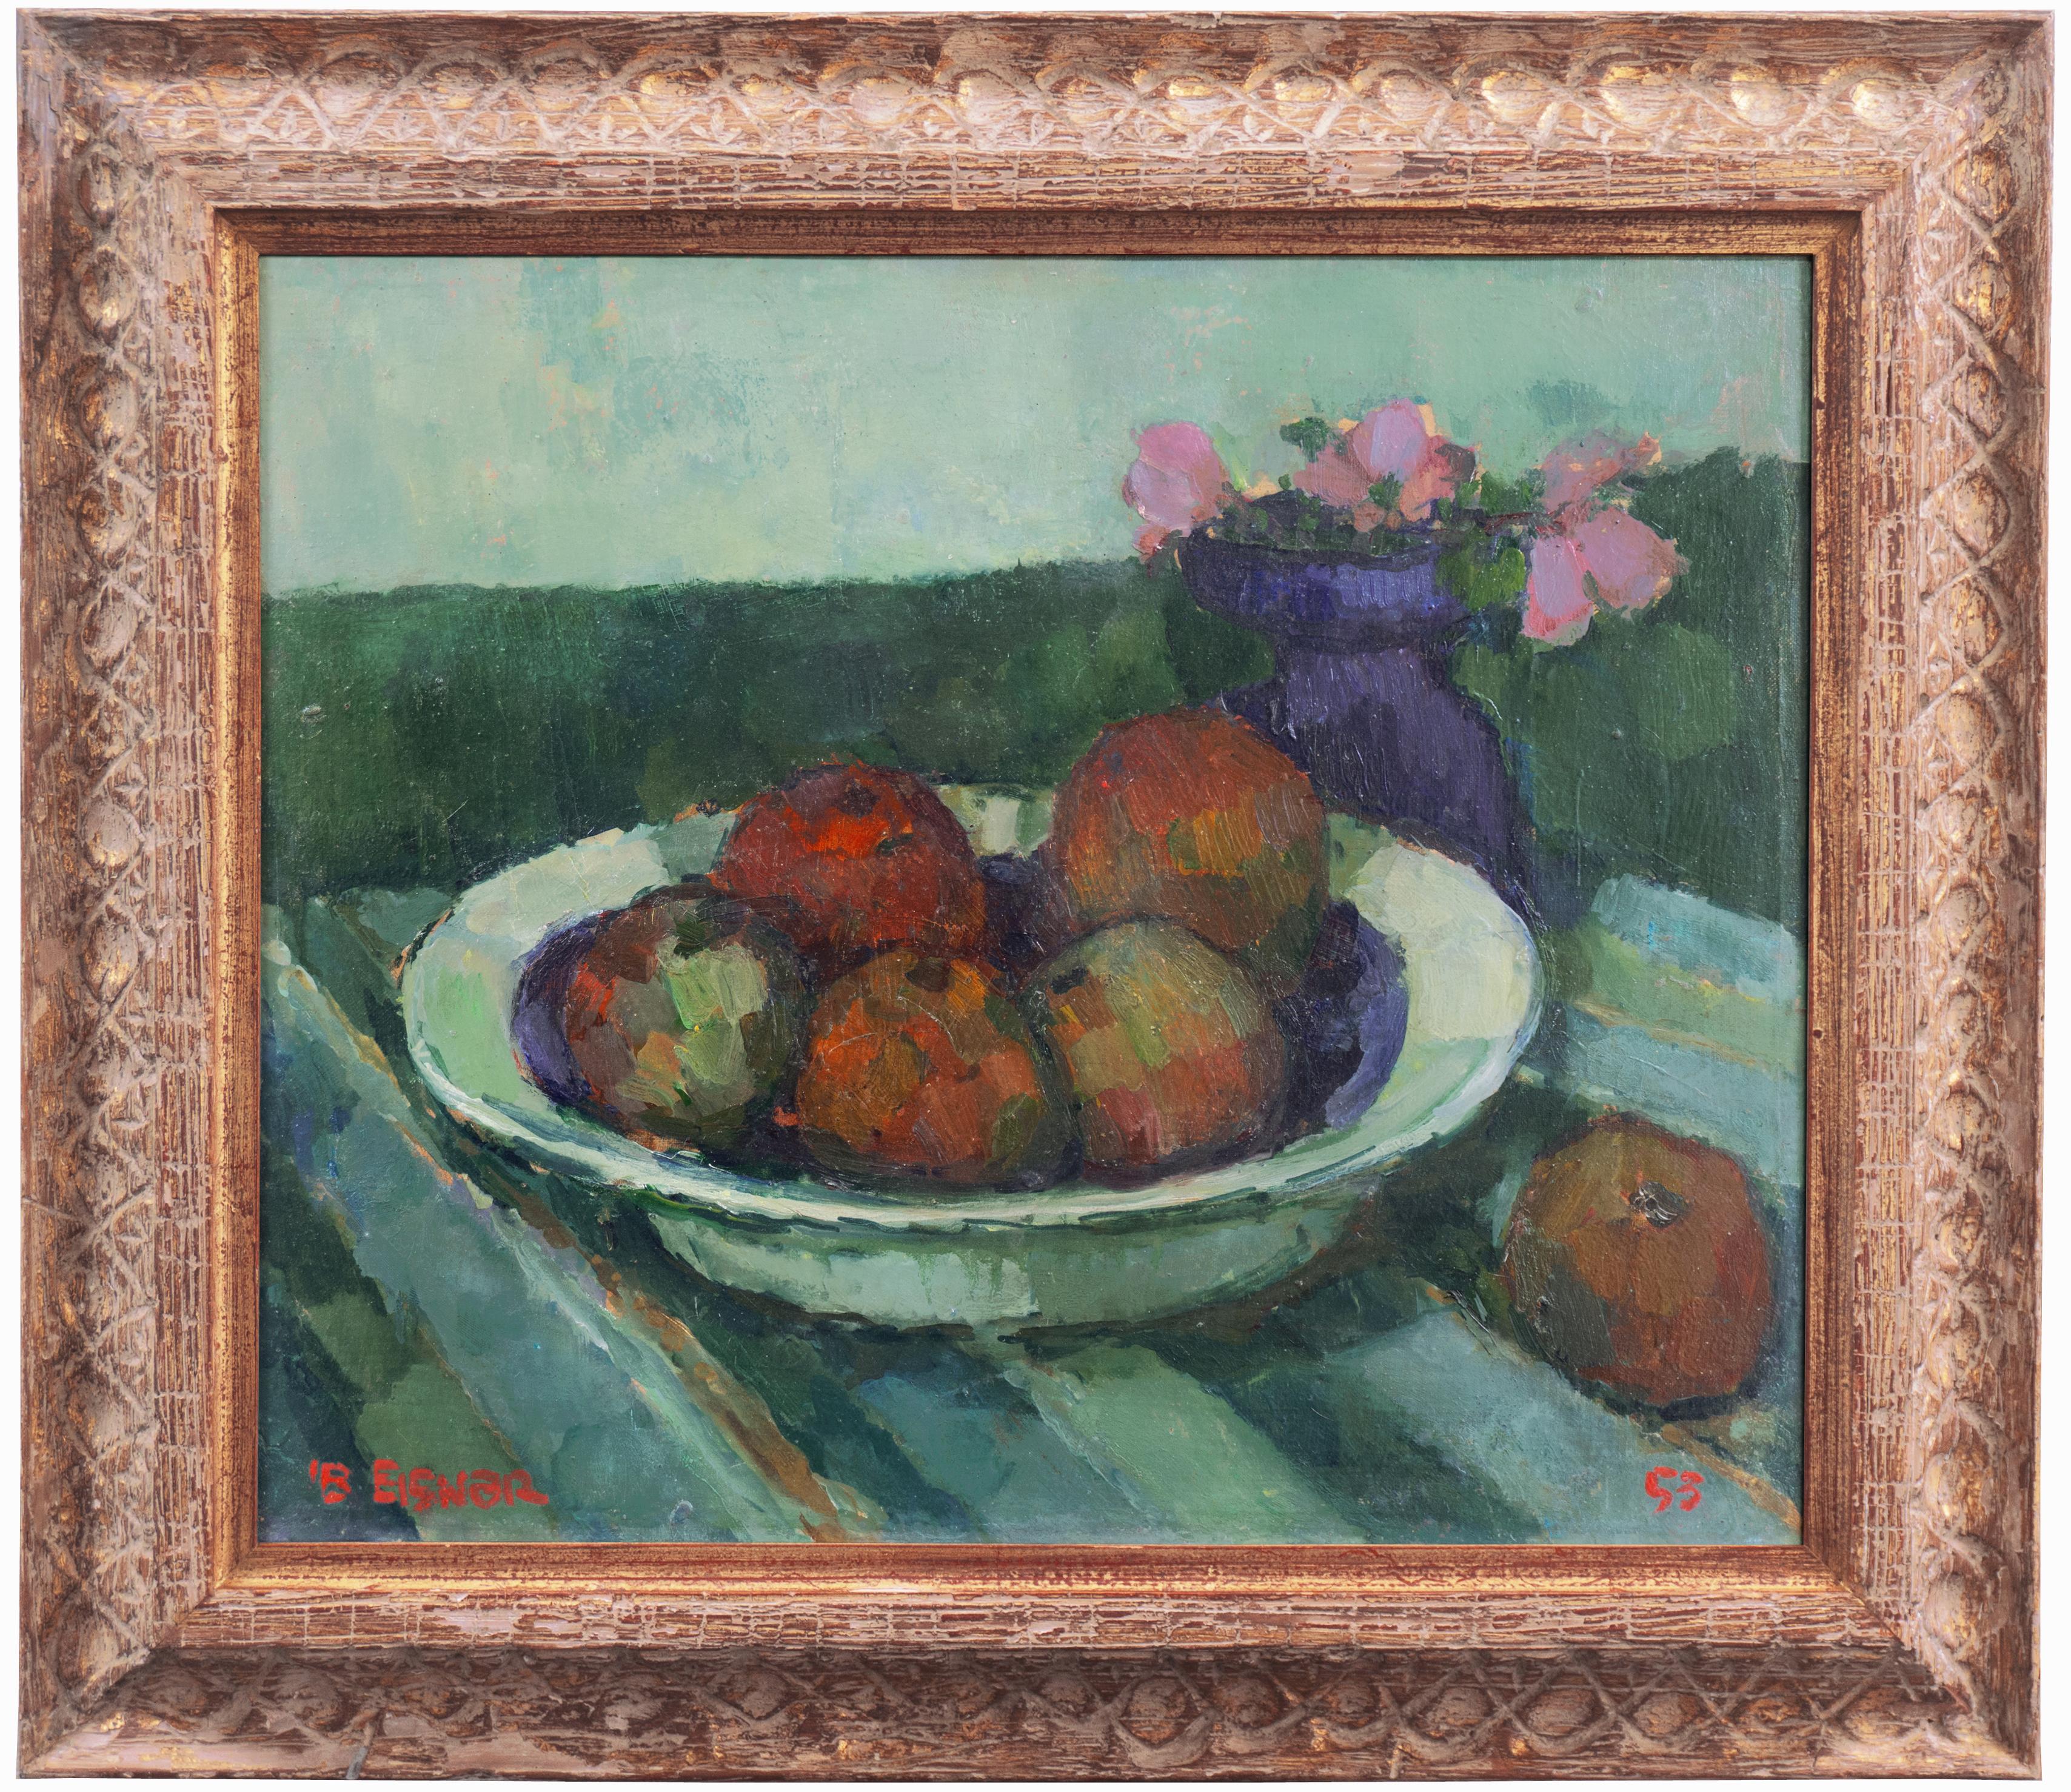 'Still Life with Fruit and Flowers', Paris, Tokyo, London, Copenhagen Academy - Painting by Ib Eisner